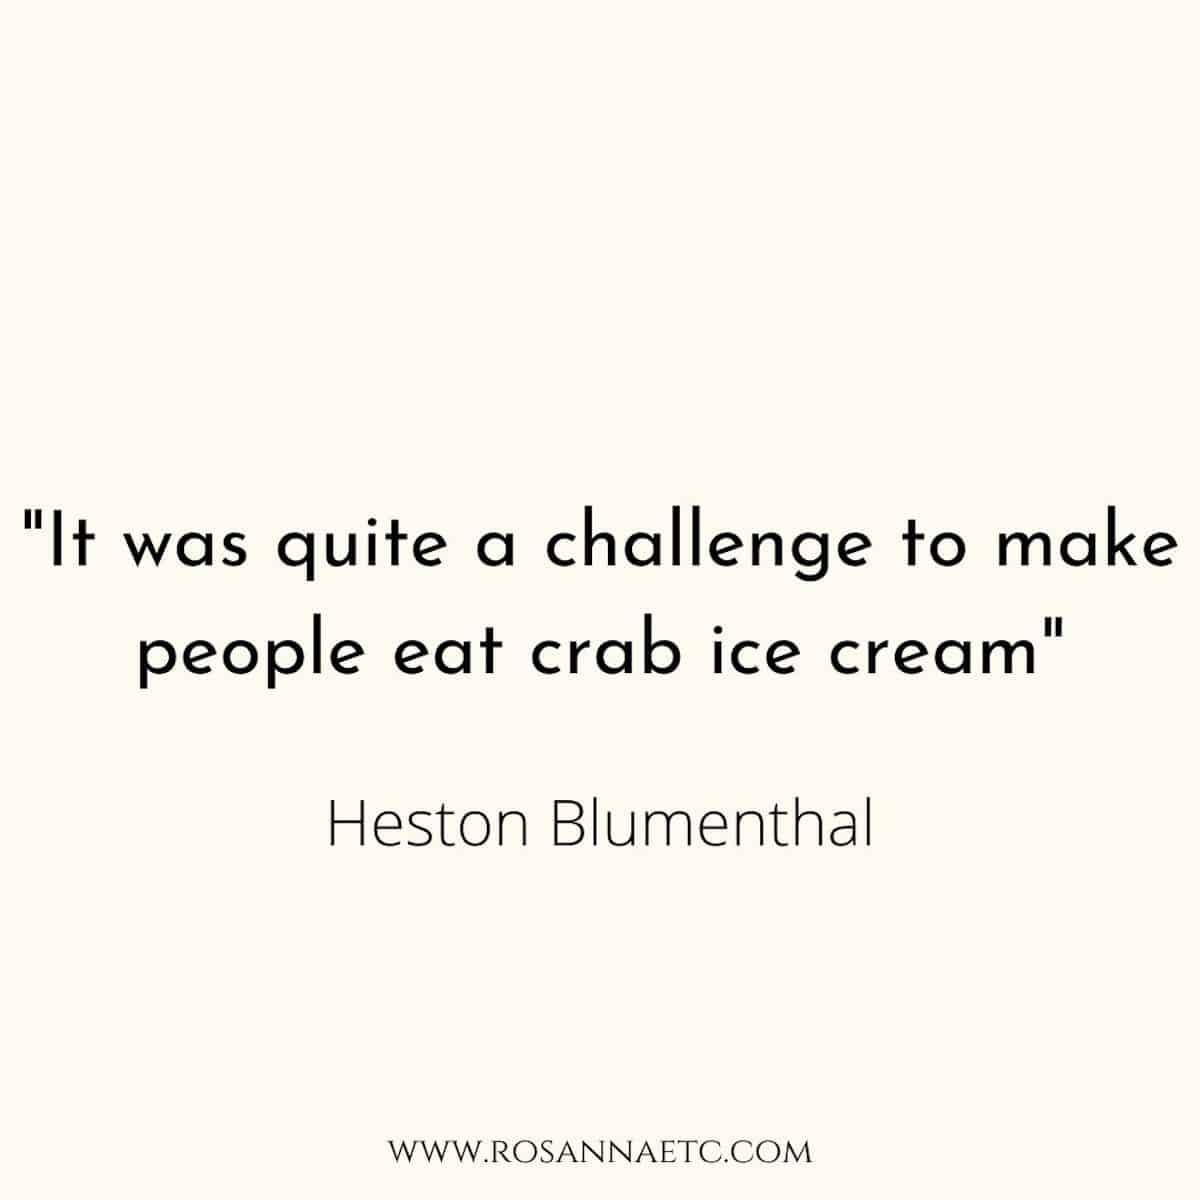 A quote from Heston Blumenthal that reads "it was quite a challenge to make people eat crab ice cream".